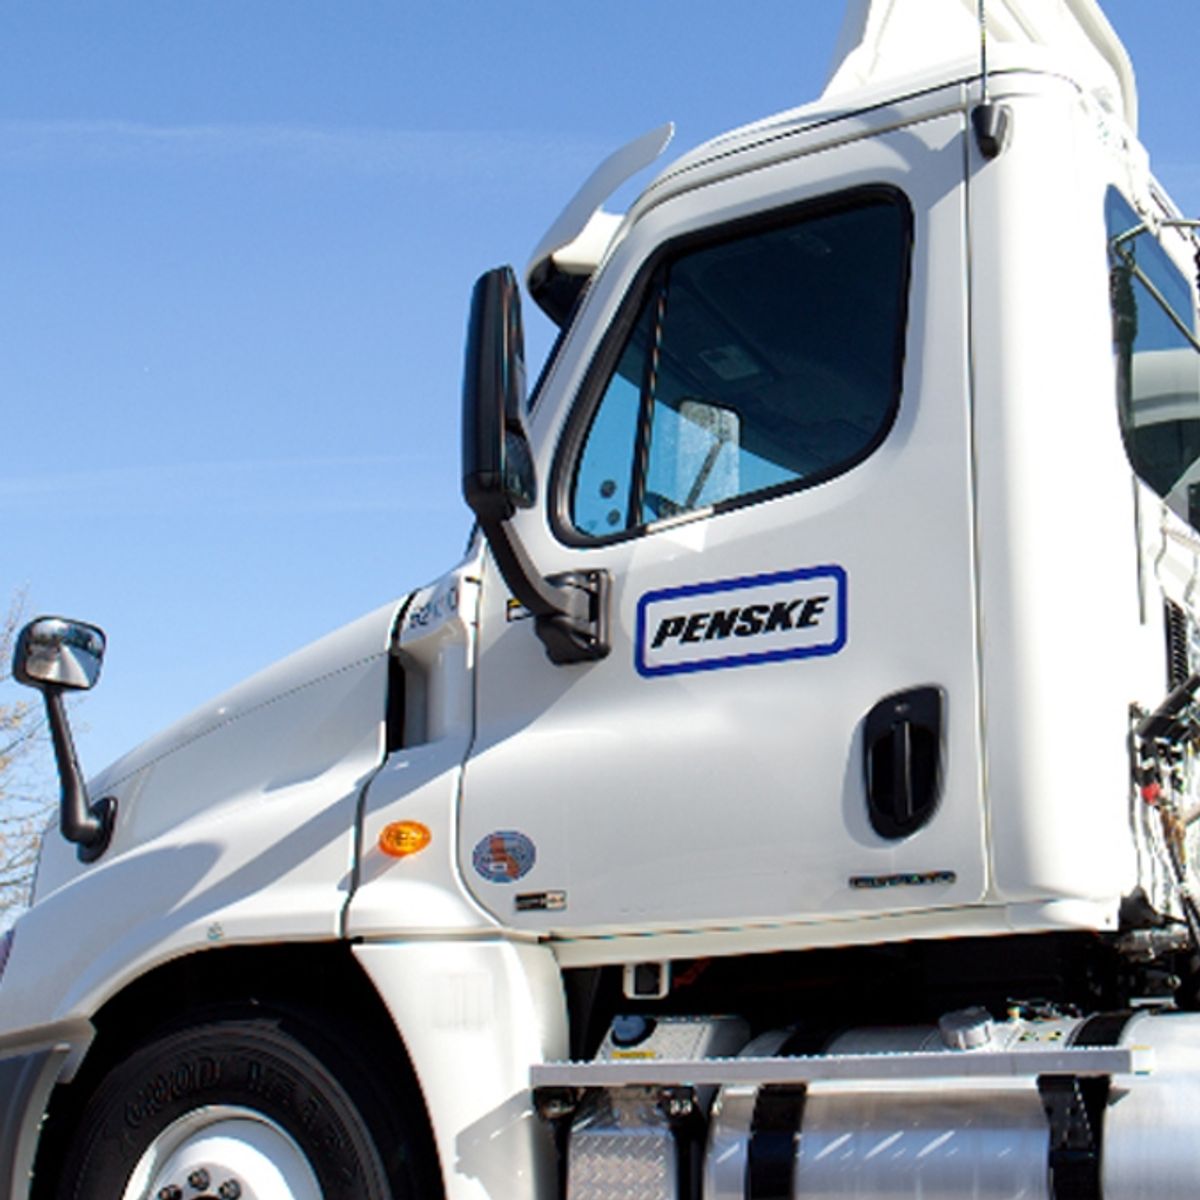 Penske and Cardinal Health Extend Dedicated Carriage Agreement